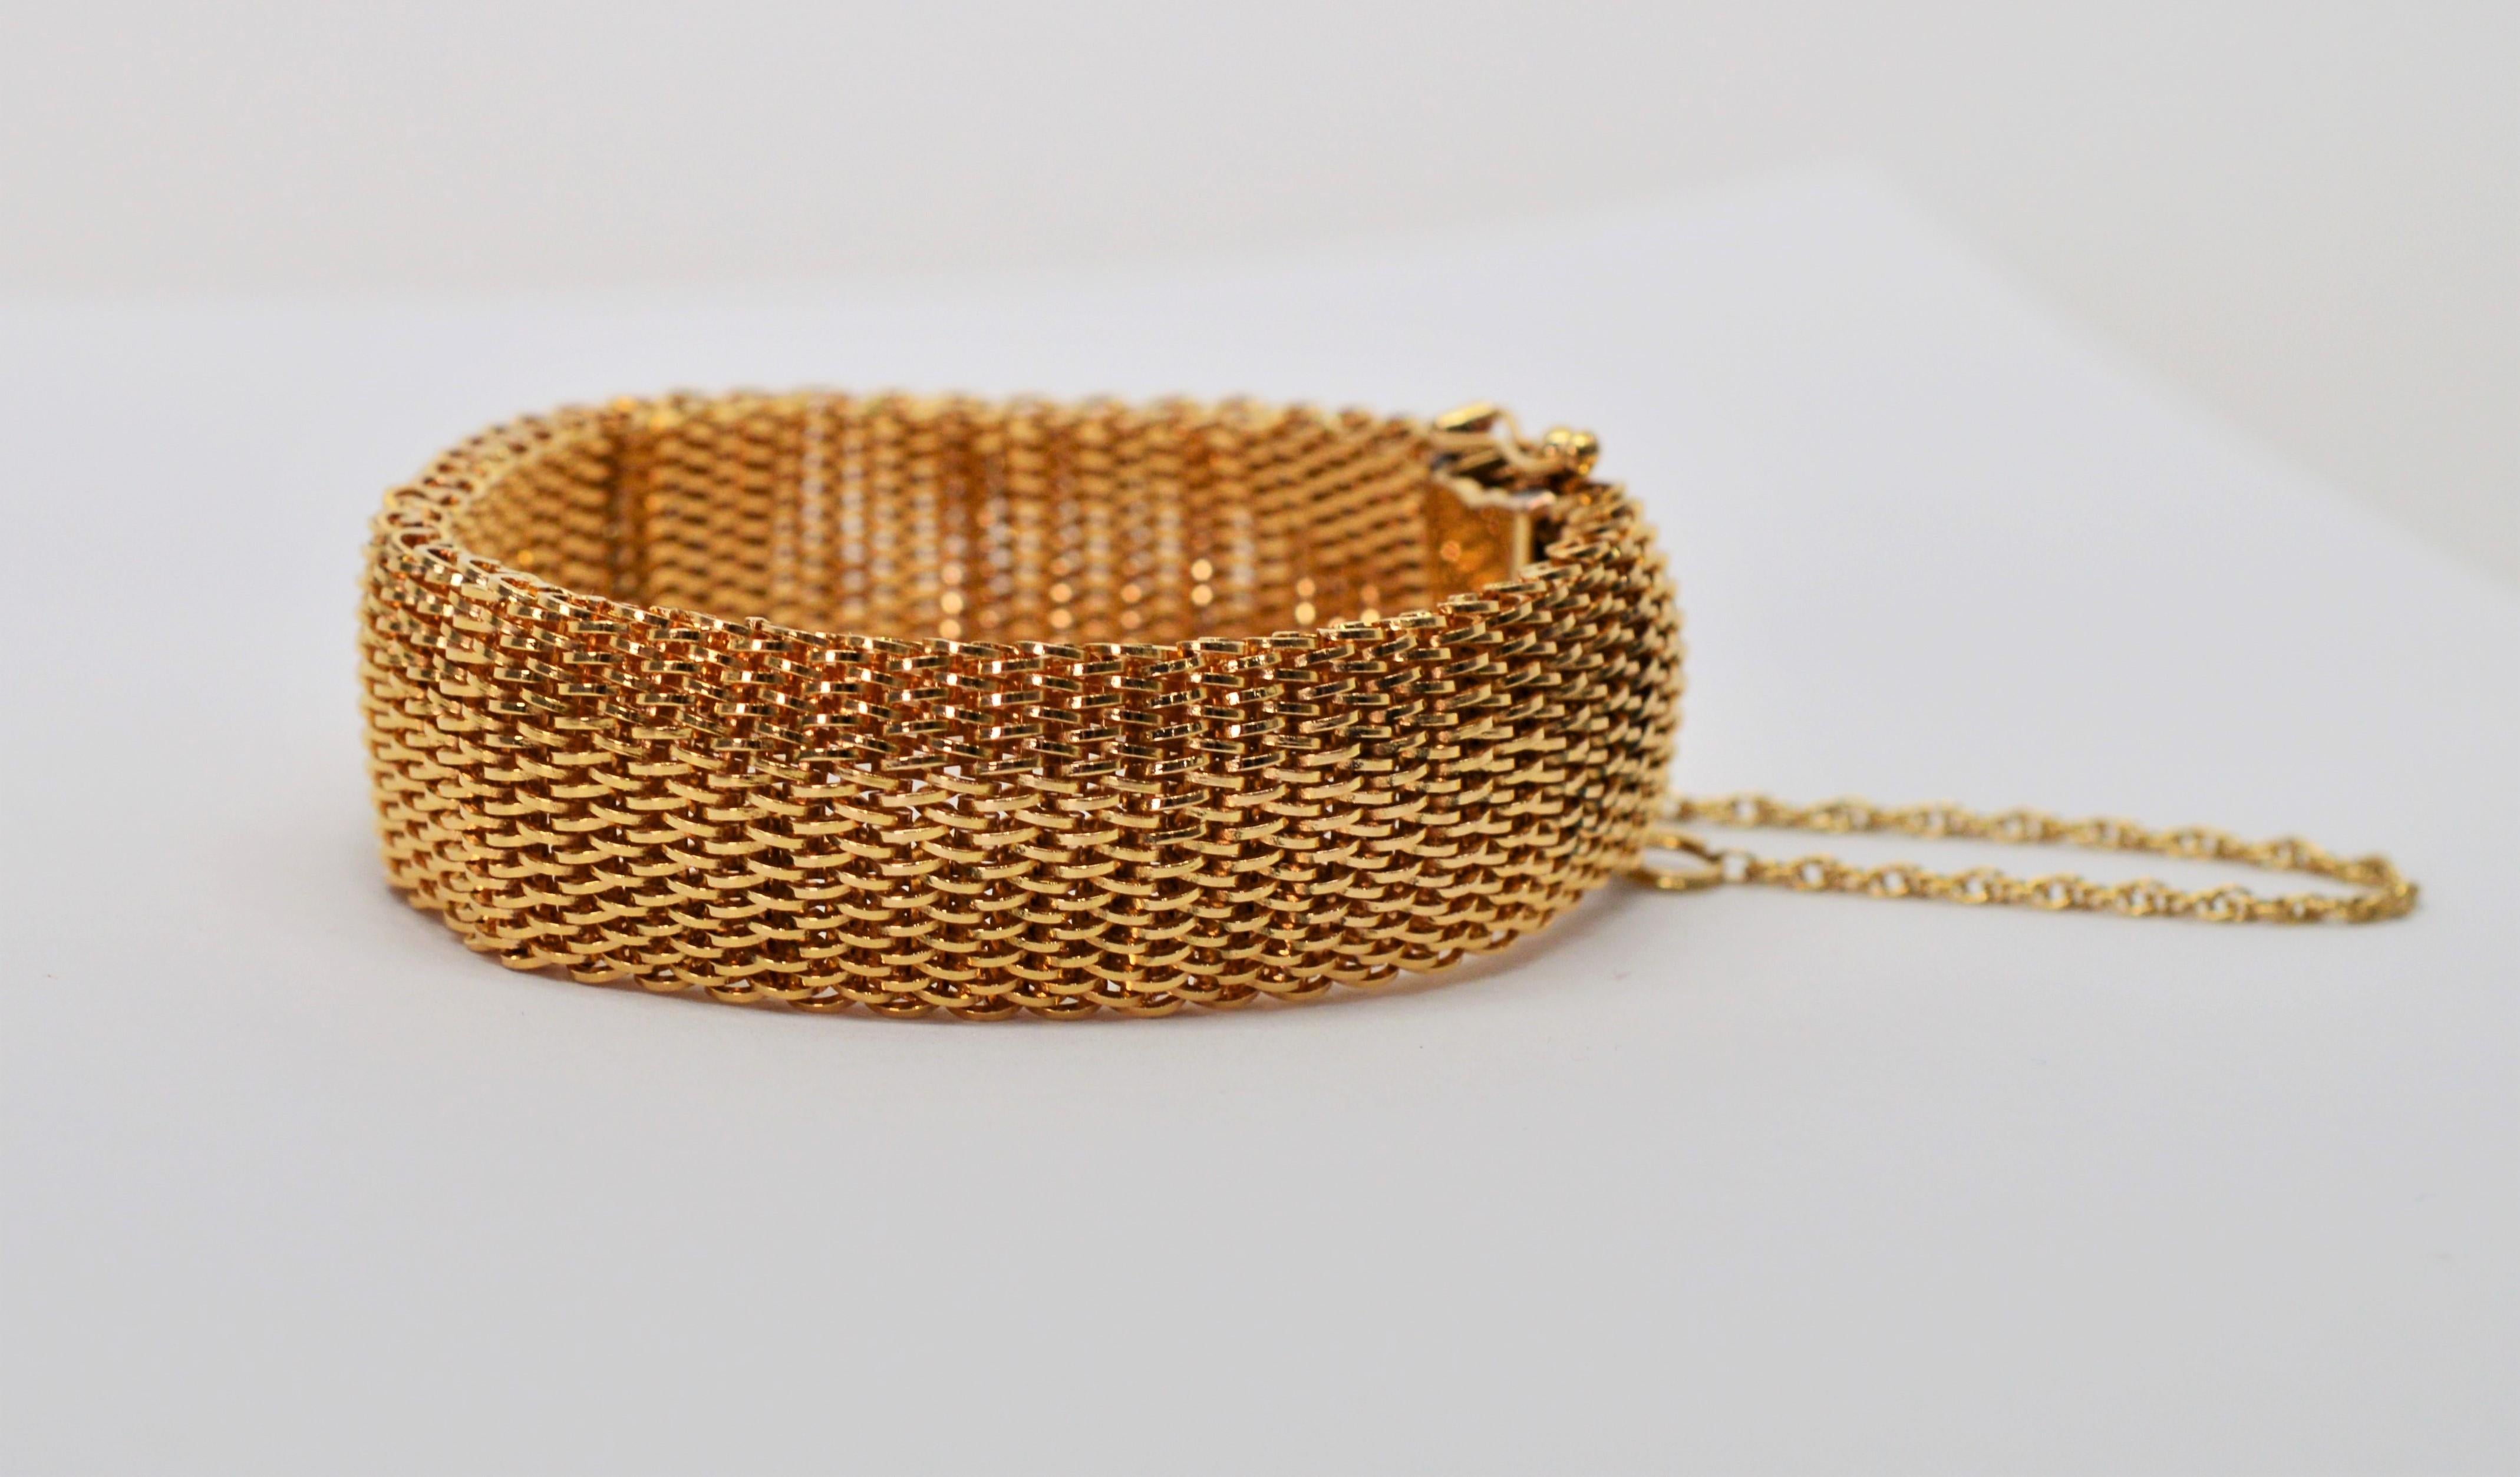 In bright eighteen karat 18K yellow gold, this sleek and stylish mesh bracelet is timeless. Always a fresh look and comfortable to wear, you will find this to be one of the most versatile pieces in your jewelry wardrobe. To determine fit, the inside